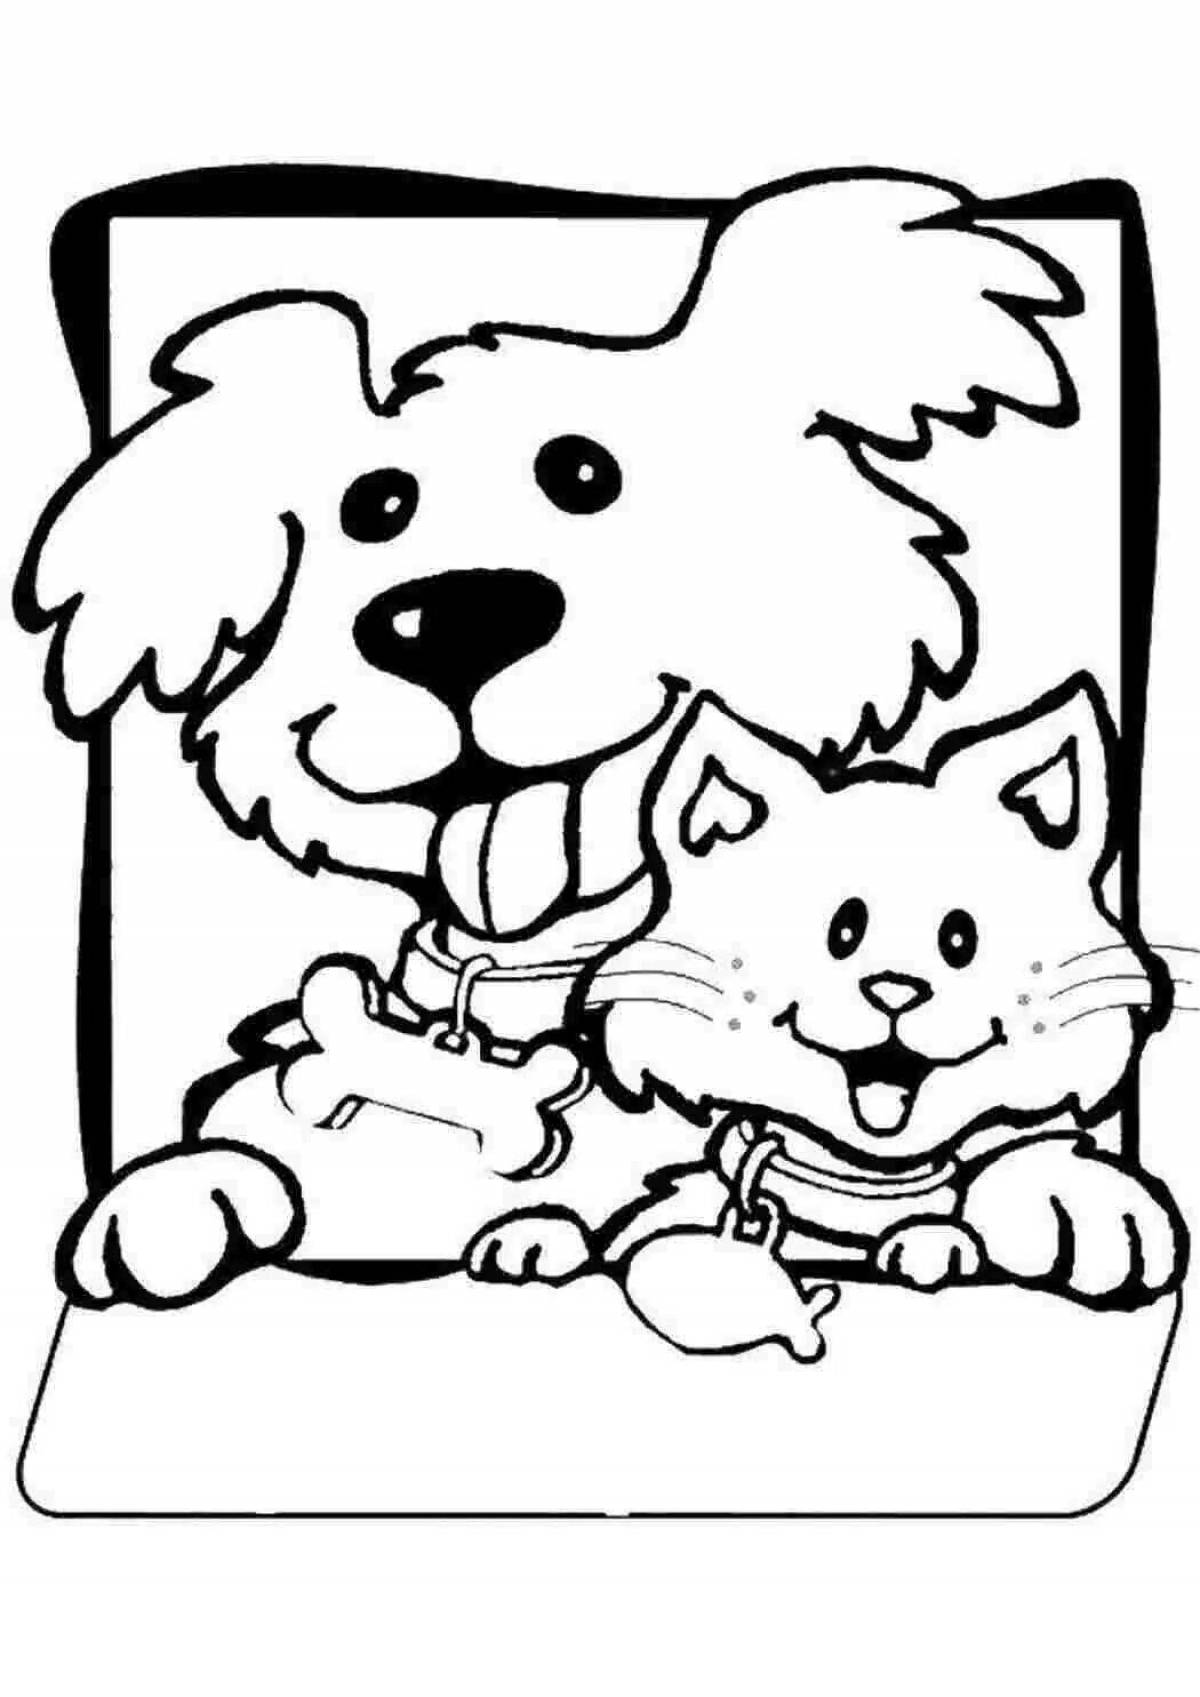 Dan kitty and dog coloring page